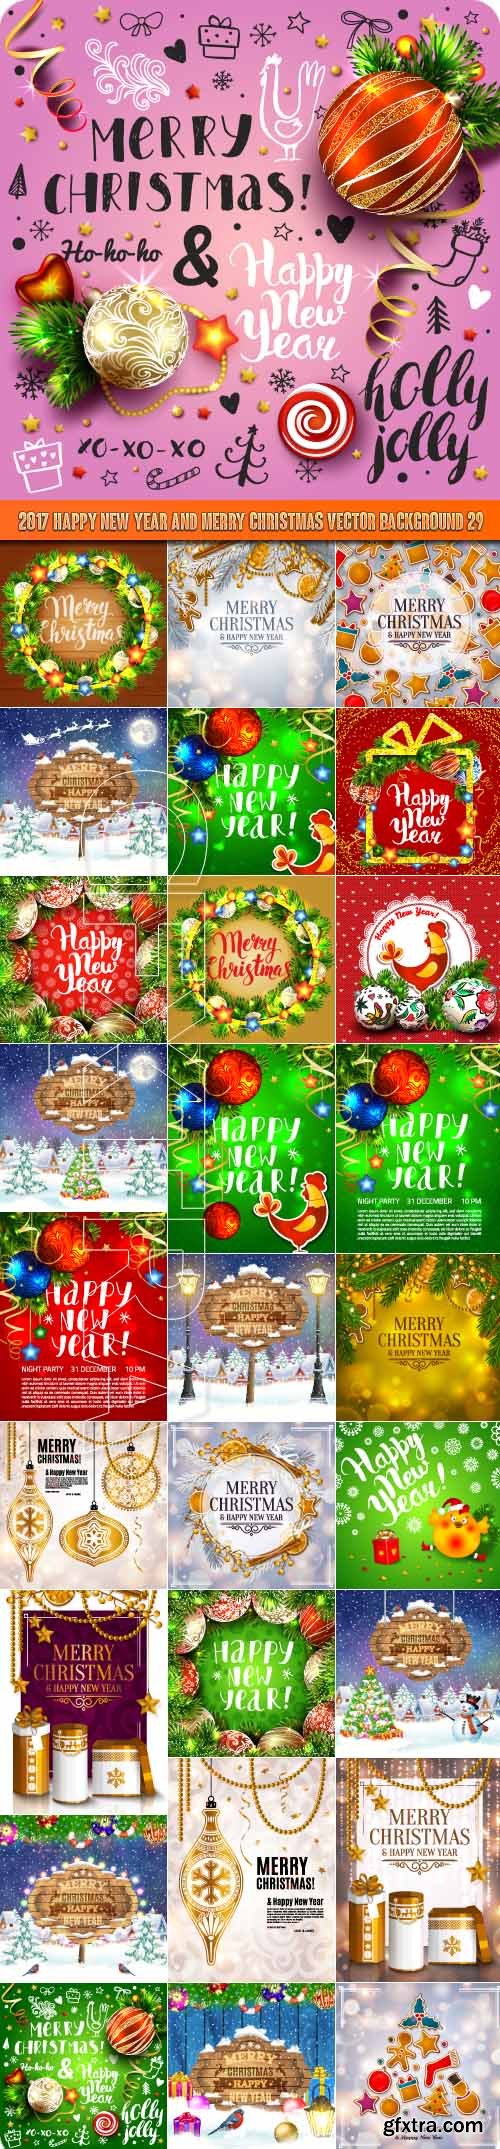 2017 Happy New Year and Merry Christmas vector background 29